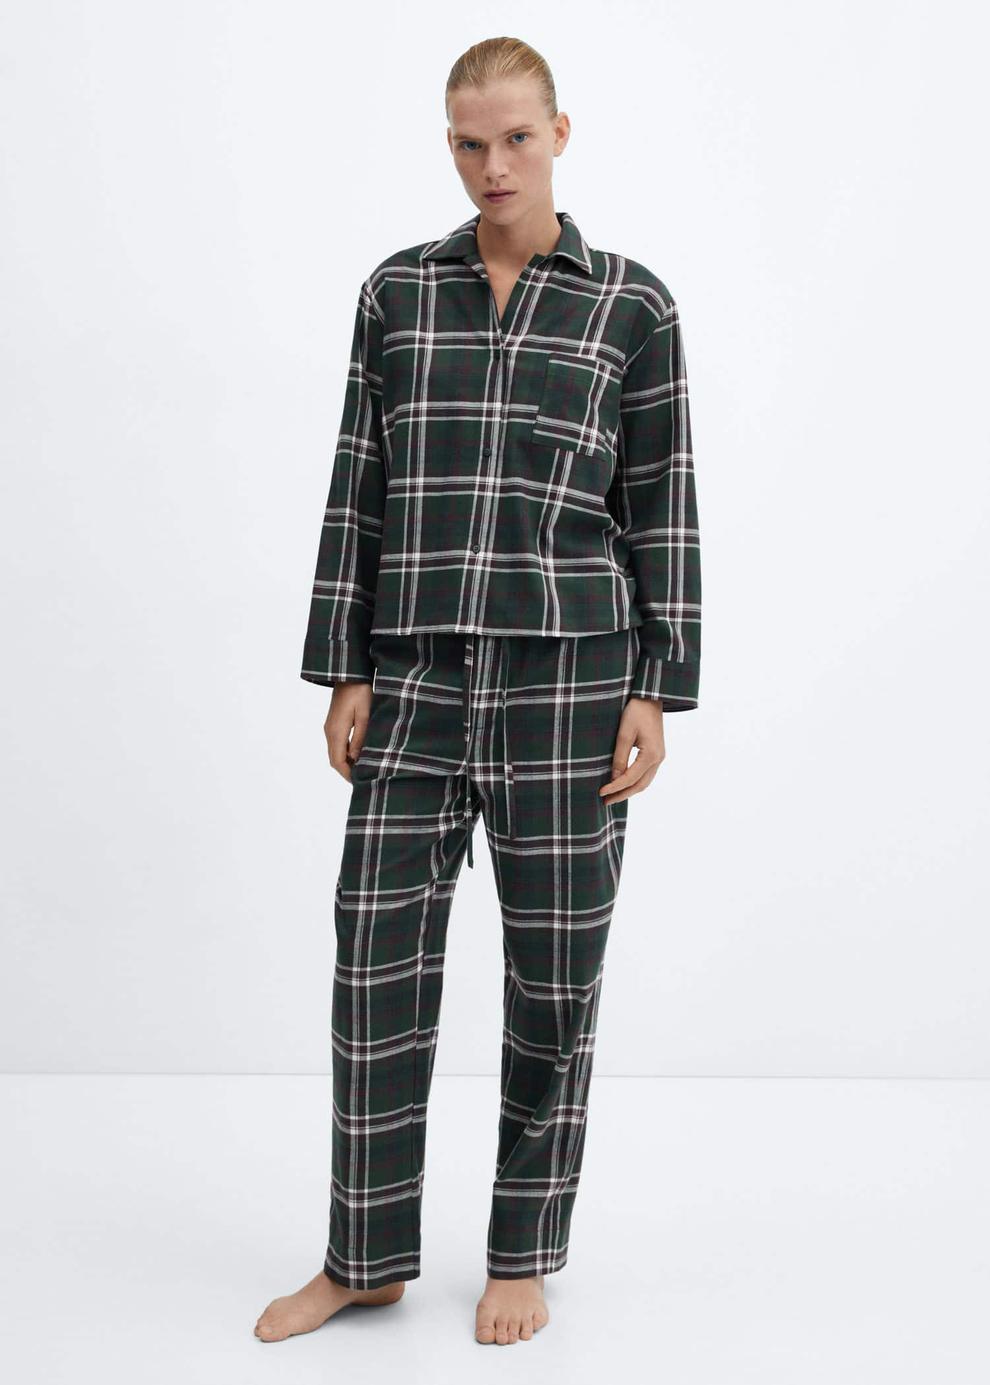 Flannel cotton pyjama shirt offers at R 699 in Mango